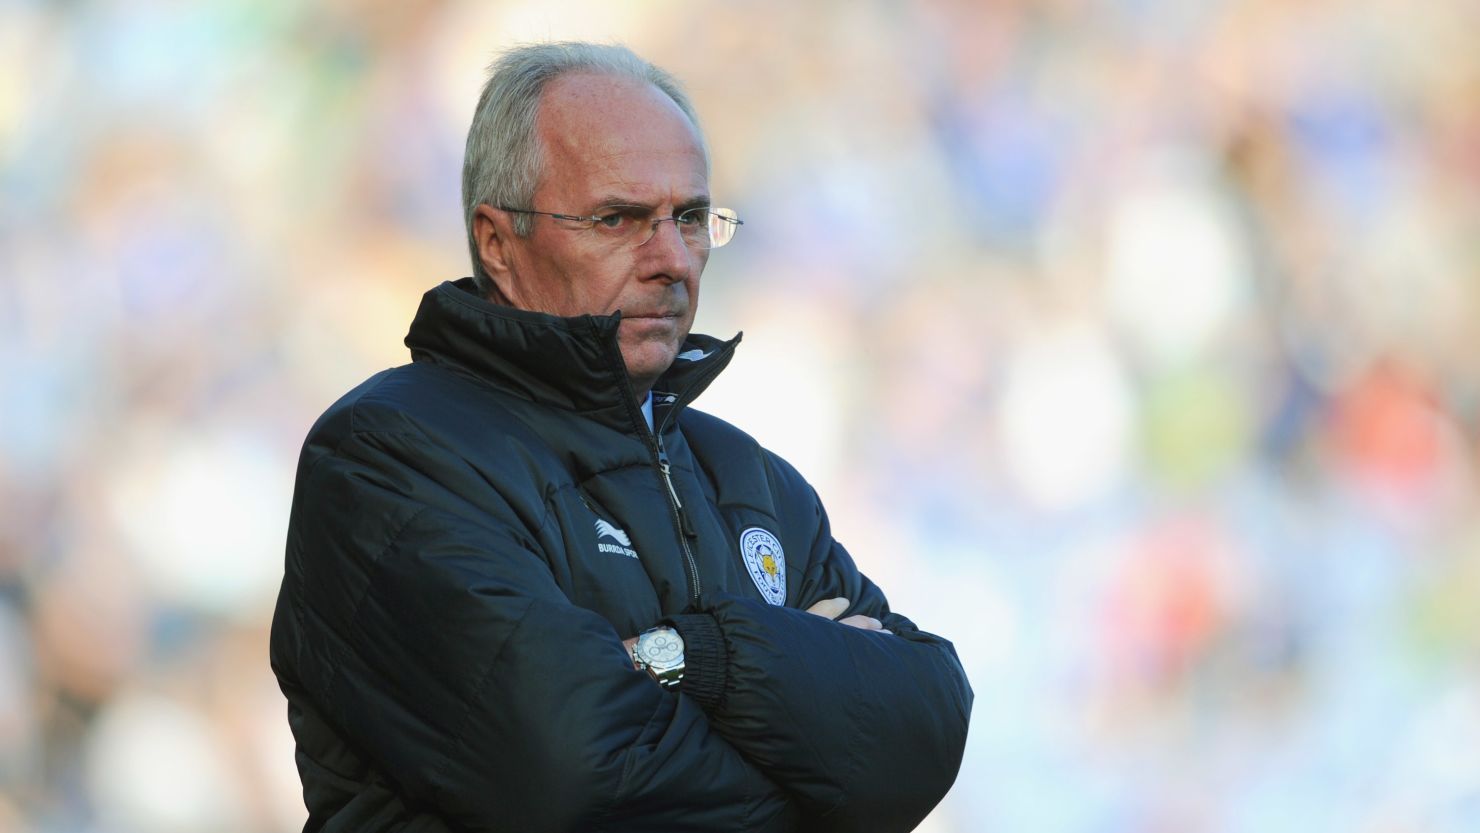 Sven-Goran Eriksson's private life was the subject of tabloid coverage while he managed the England team.